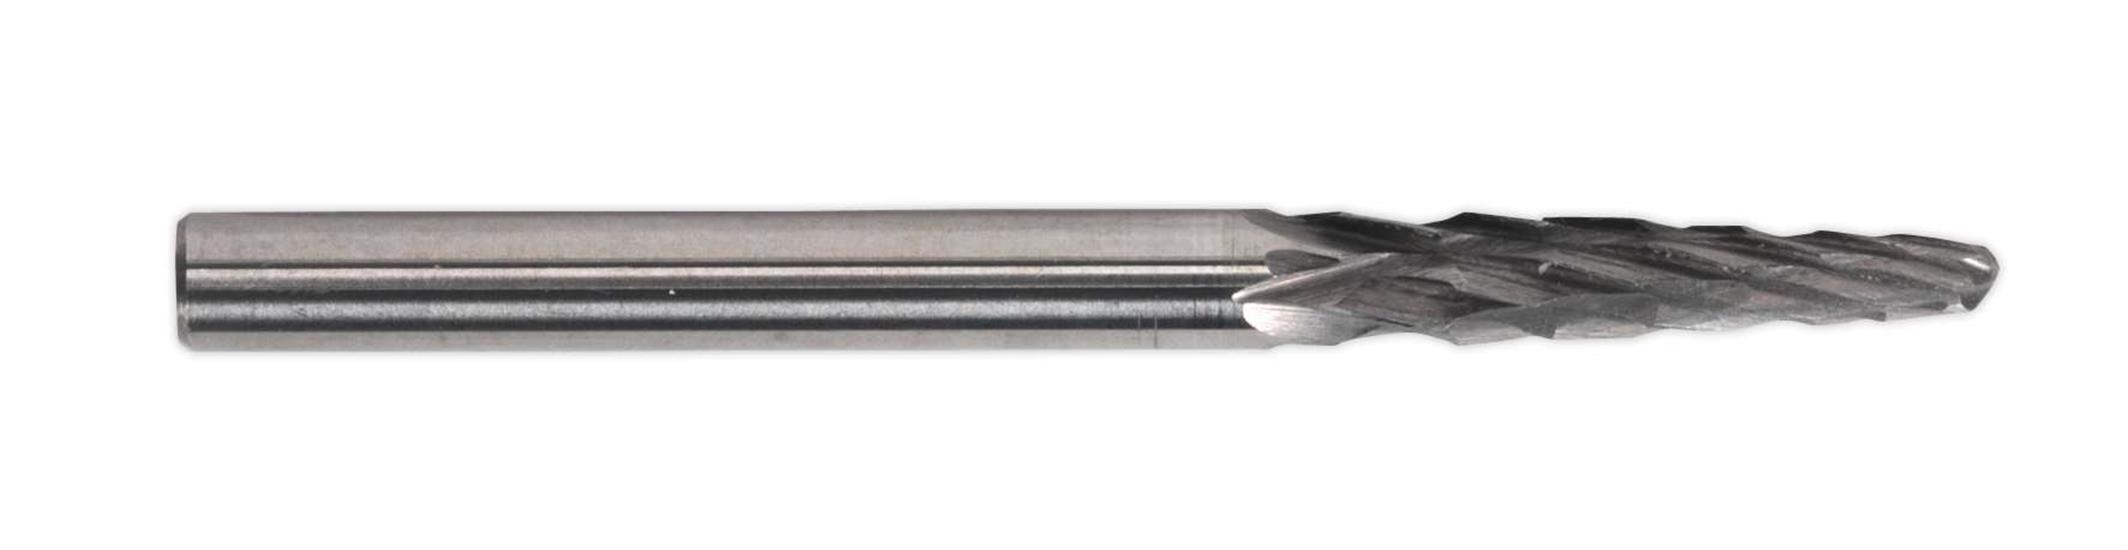 Sealey MCB004 - Micro Carbide Burr Ball Nose Taper 3mm Pack of 3